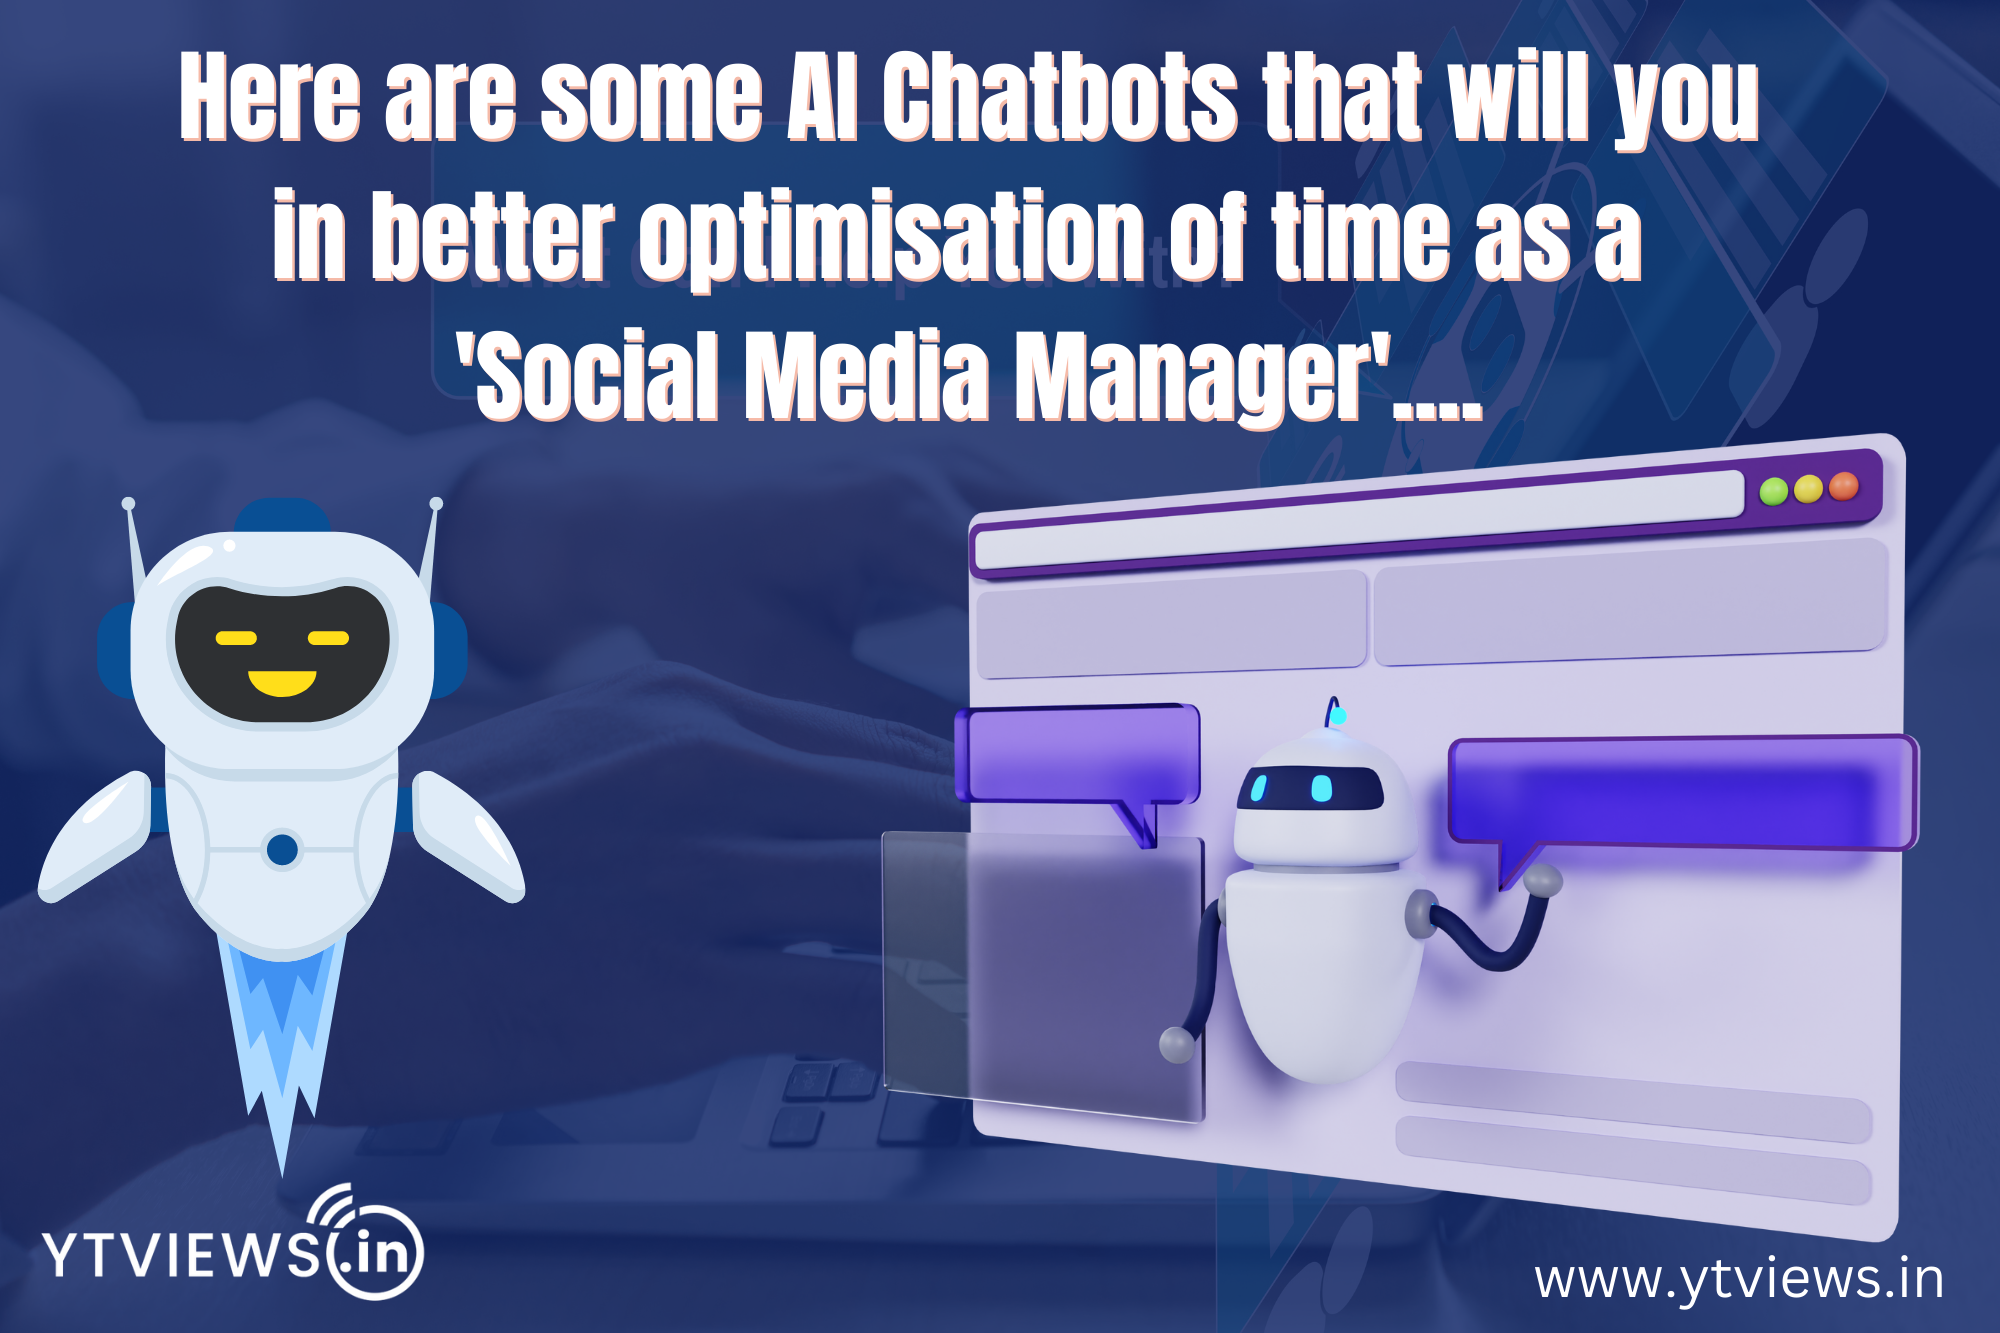 AI chatbots that will help you in better optimization of time as a social media manager